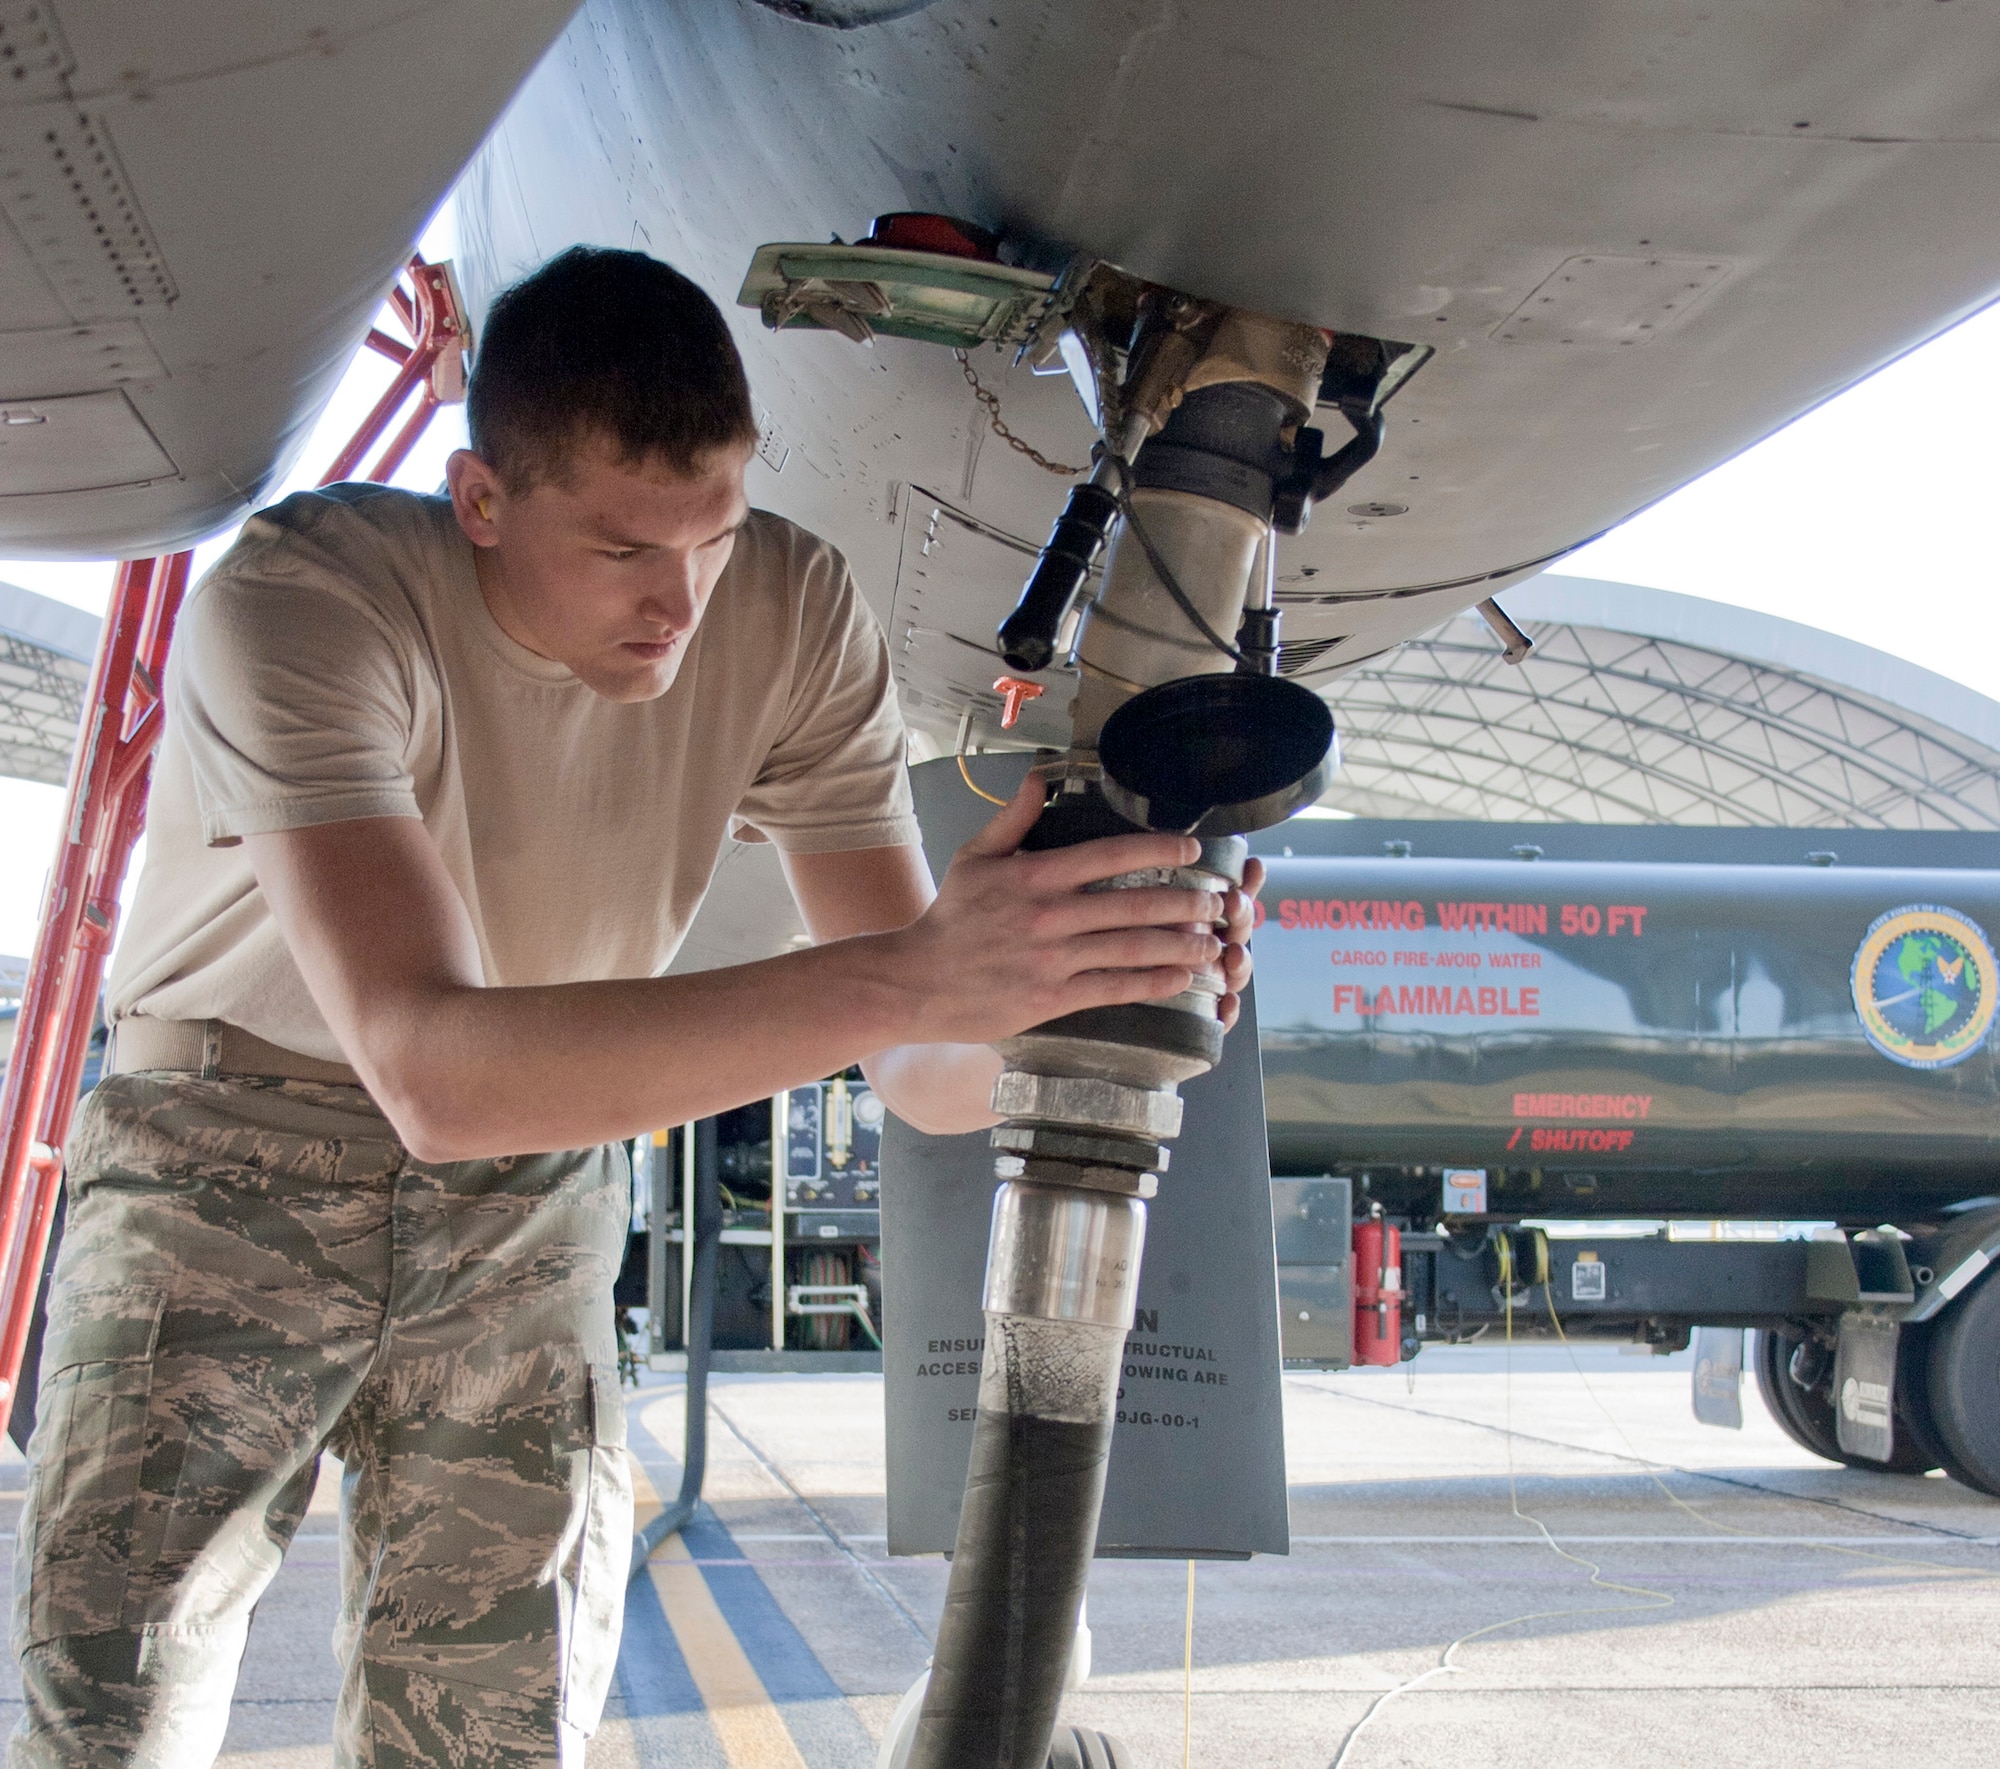 Senior Airman Jacob Prine checks the fuel connection to a F-15 Eagle Oct. 22, 2010, prior to a flight test of new, environmentally-friendly fuel. Aircrews from the 46th Test Wing and Air Force engineers evaluated flight parameters using a blend of standard JP-8 fuel and hydro-treated, renewable jet biofuel. The Air Force is working toward changing half of the continental U.S. jet fuel requirement to alternative fuels by 2016. (U.S. Air Force photo/2nd Lt. Andrew Caulk)